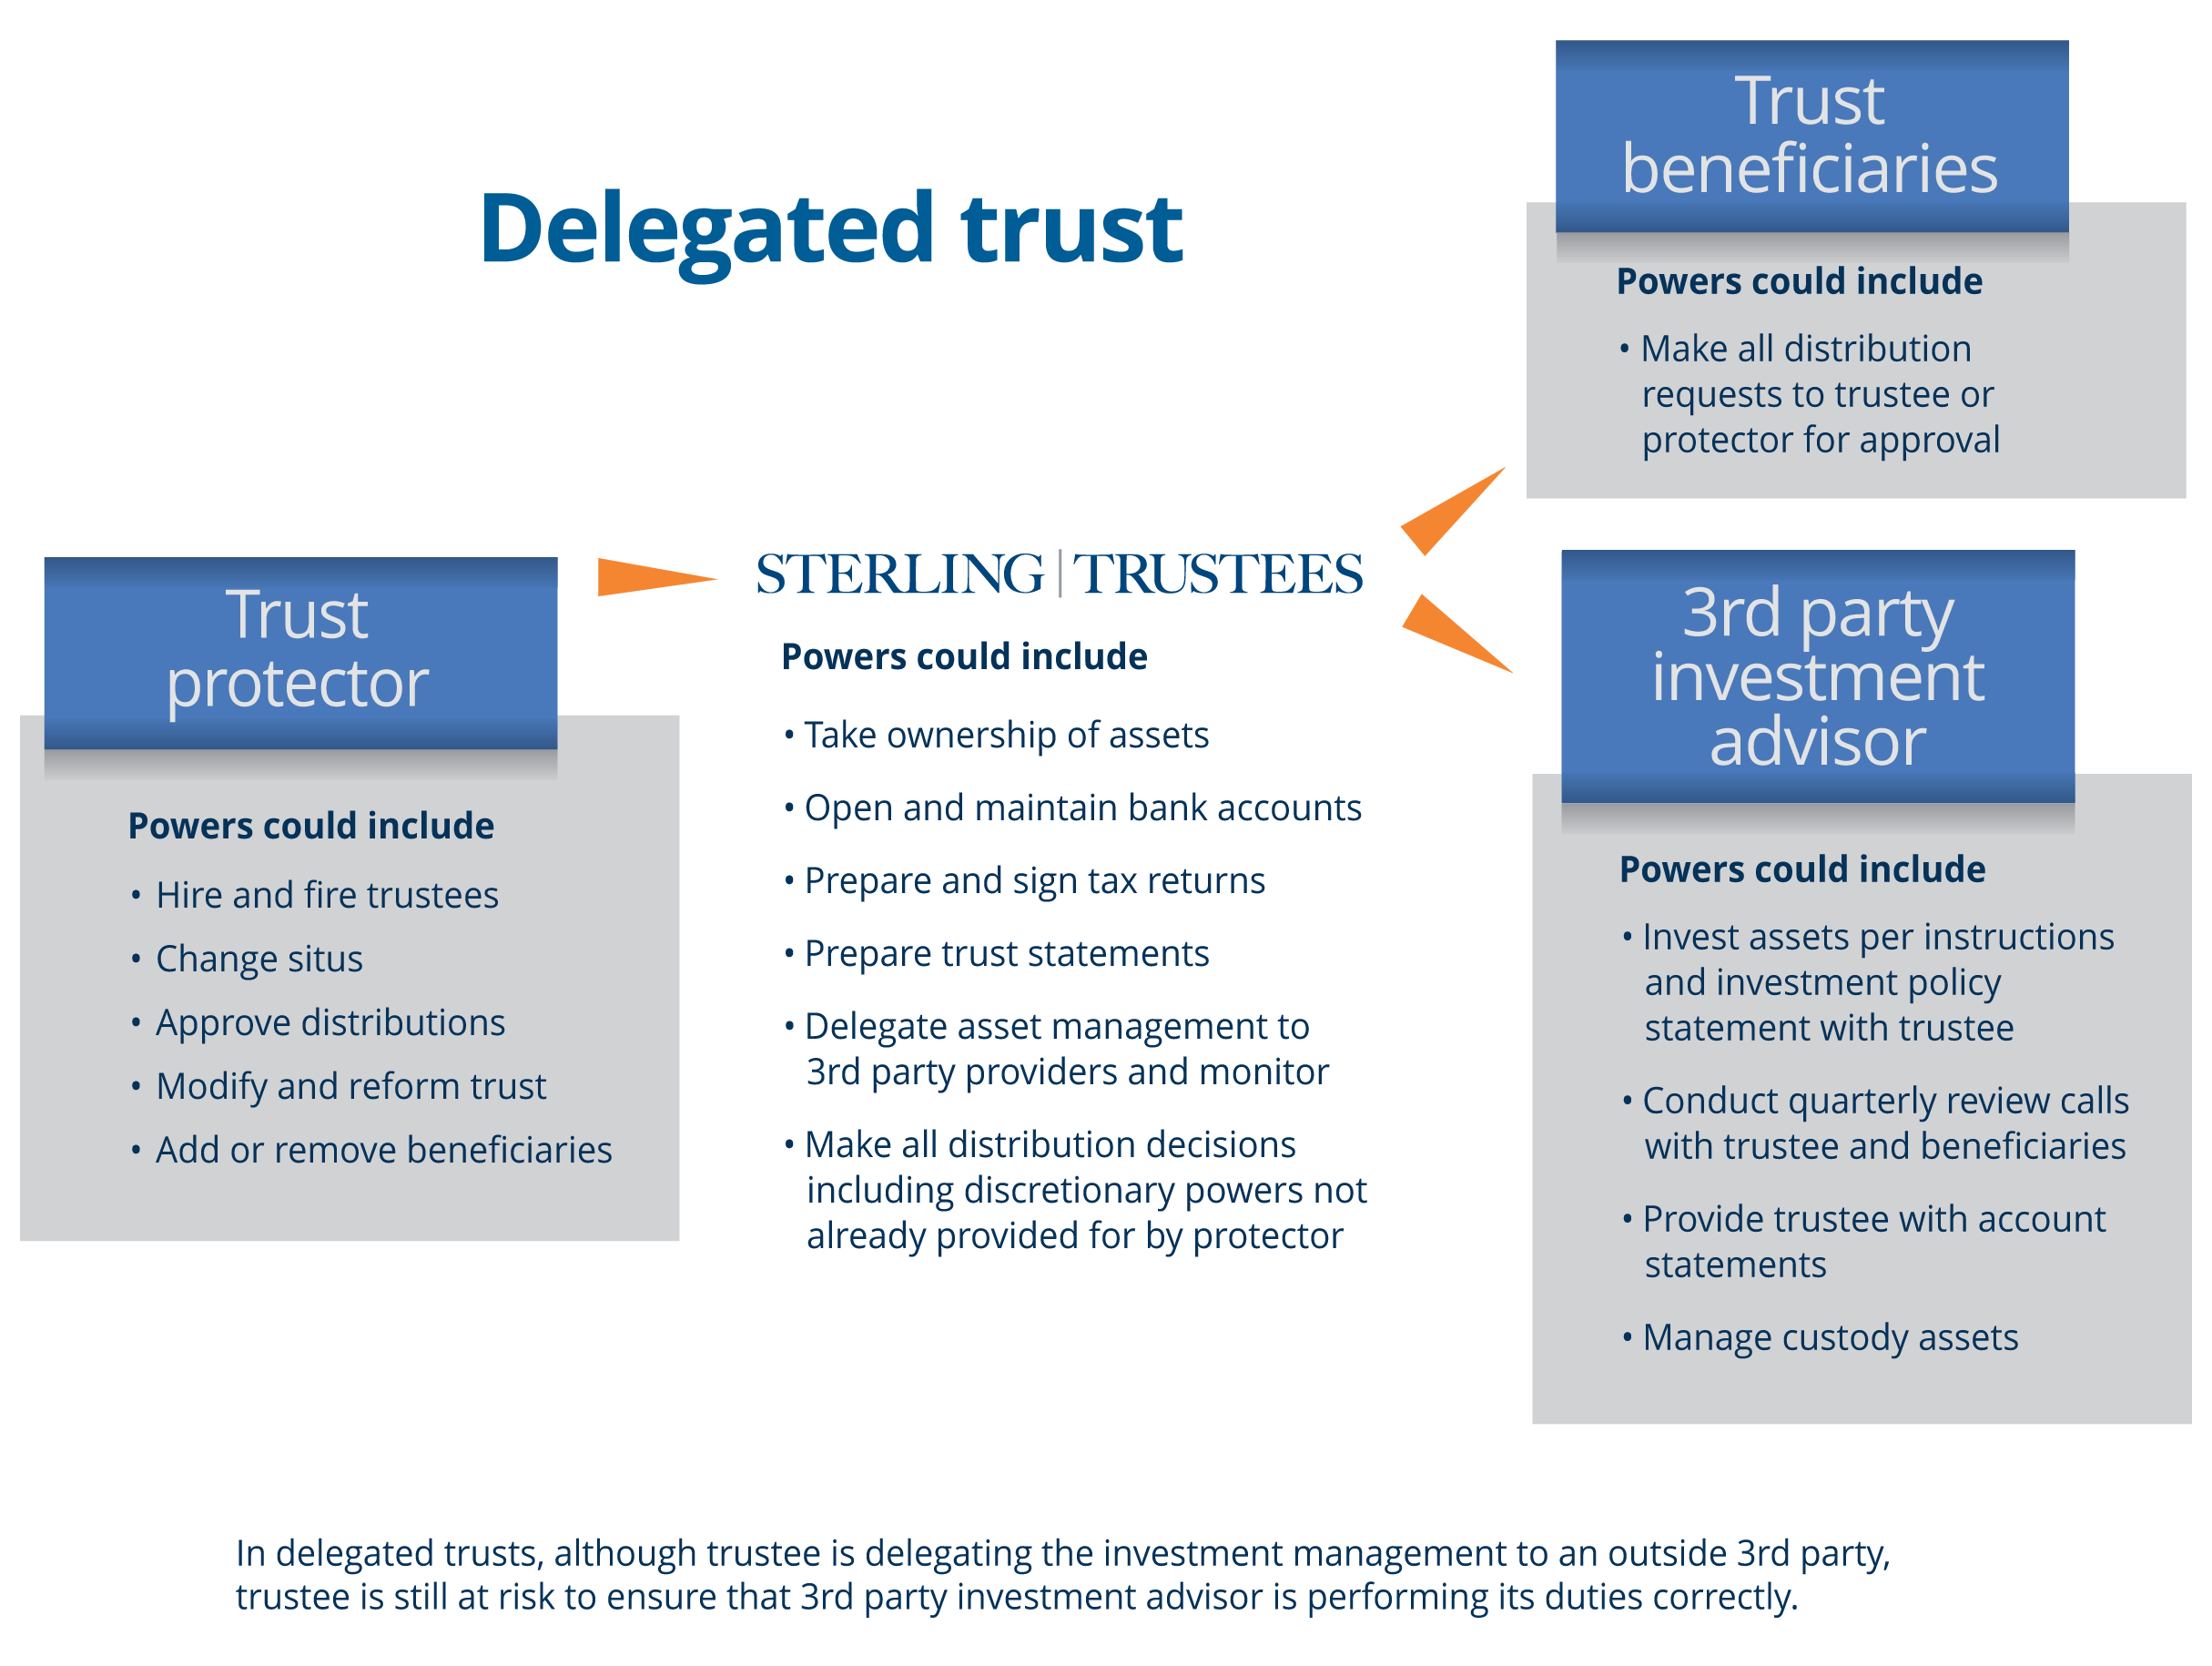 Illustrates the powers of trust protector, trust beneficiaries, third-party investment advisor and Sterling Trustees in a delegated trust